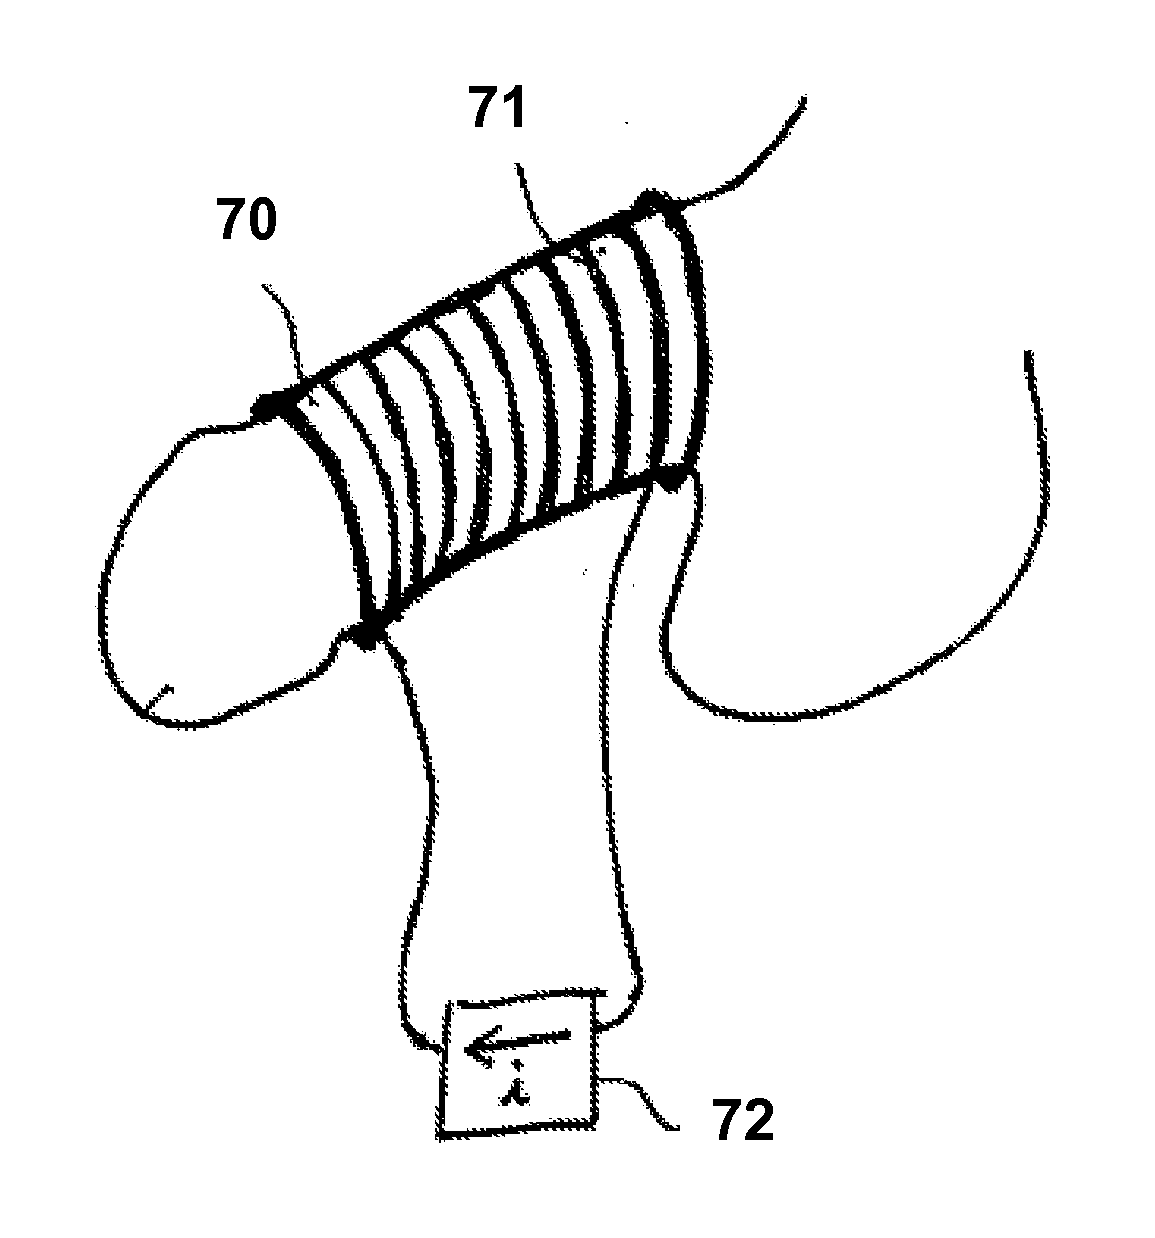 Systems and methods for the treatment of pelvic disorders including magnetic particulates